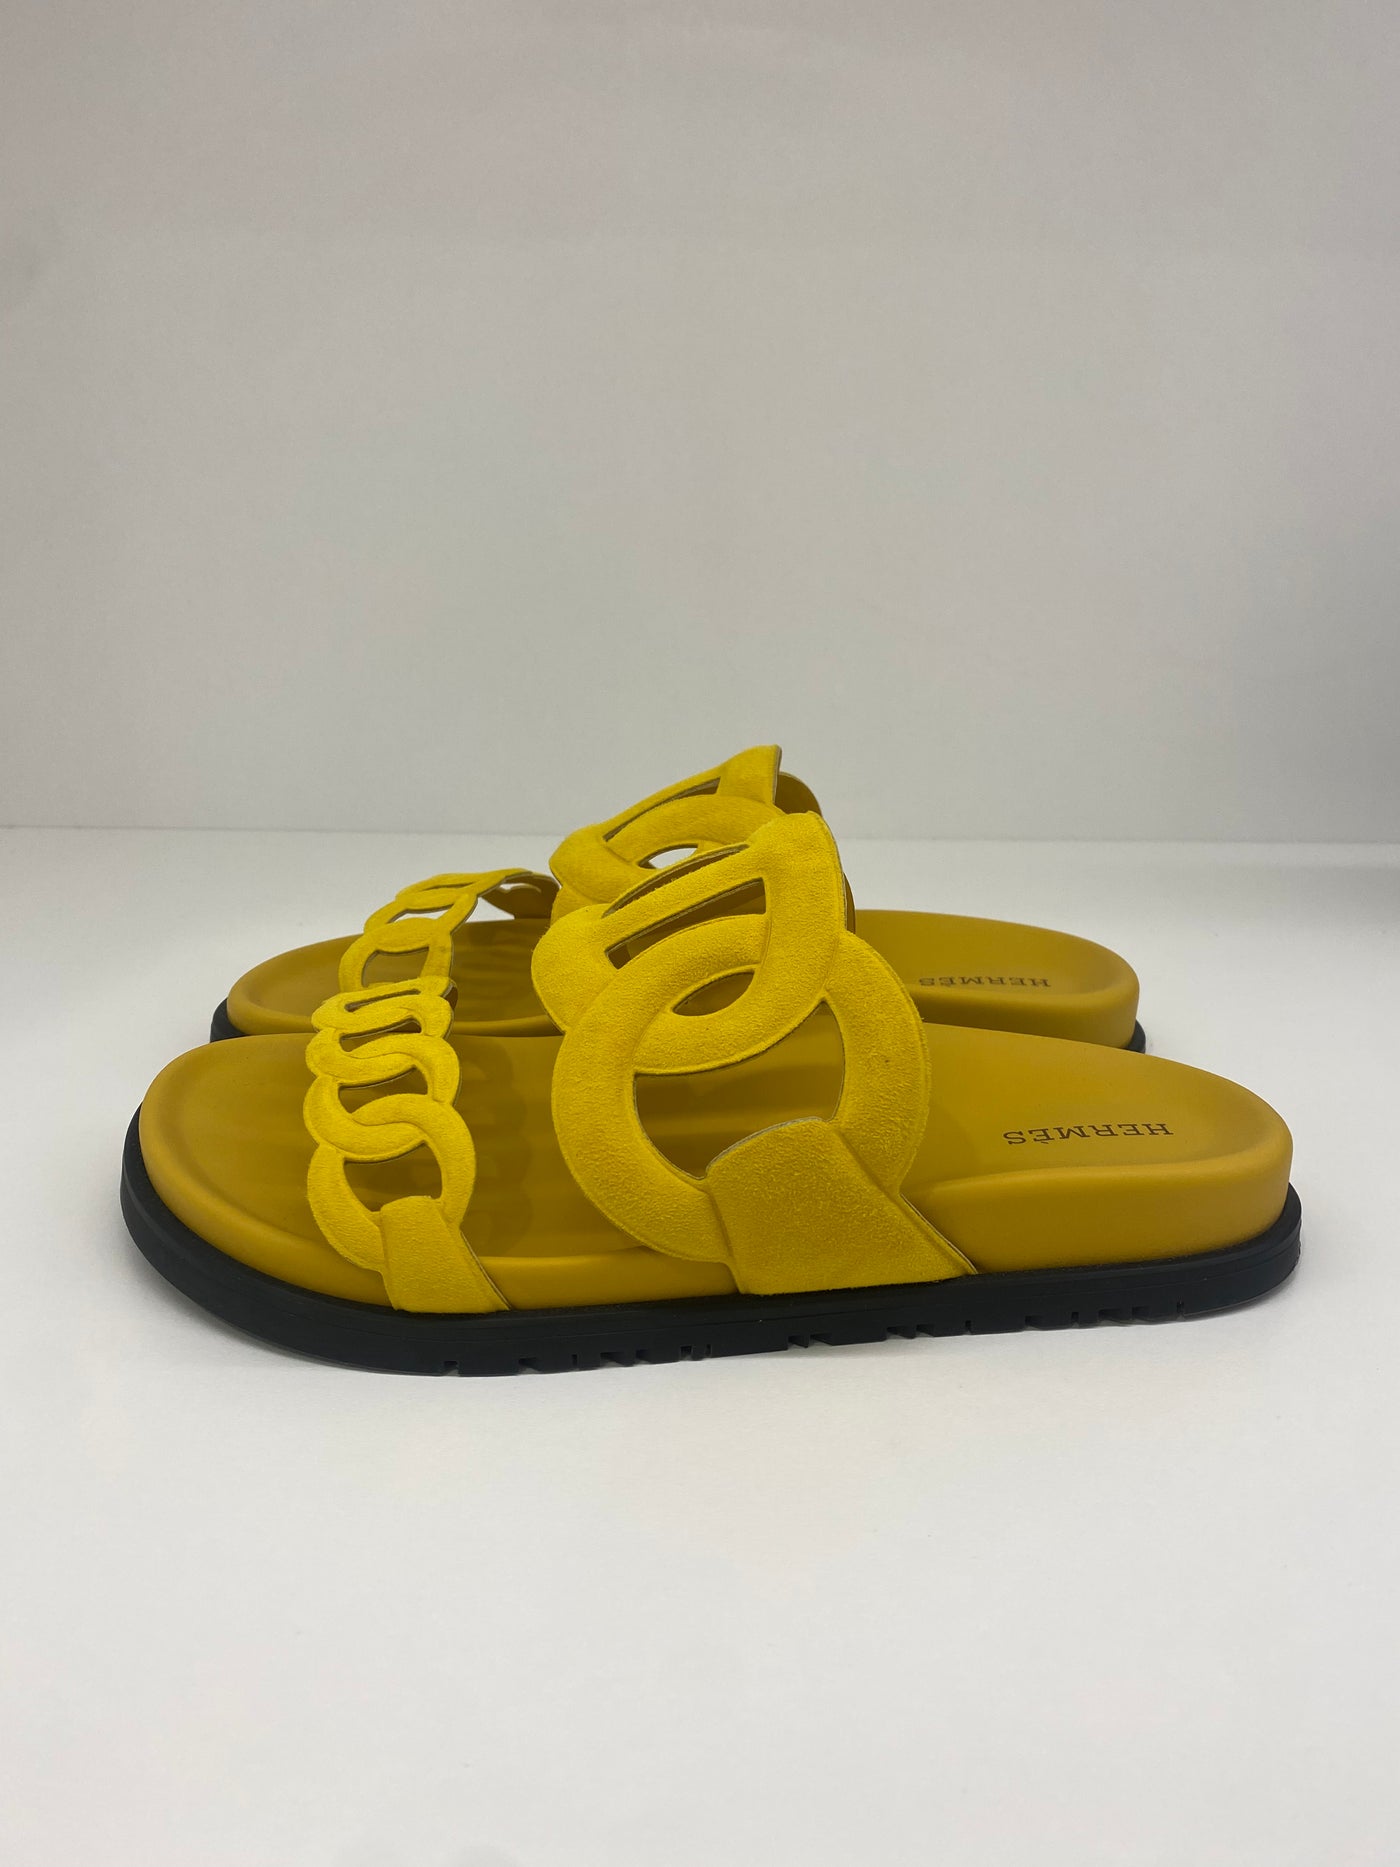 Hermes Extra Sandals Yellow - Size 37